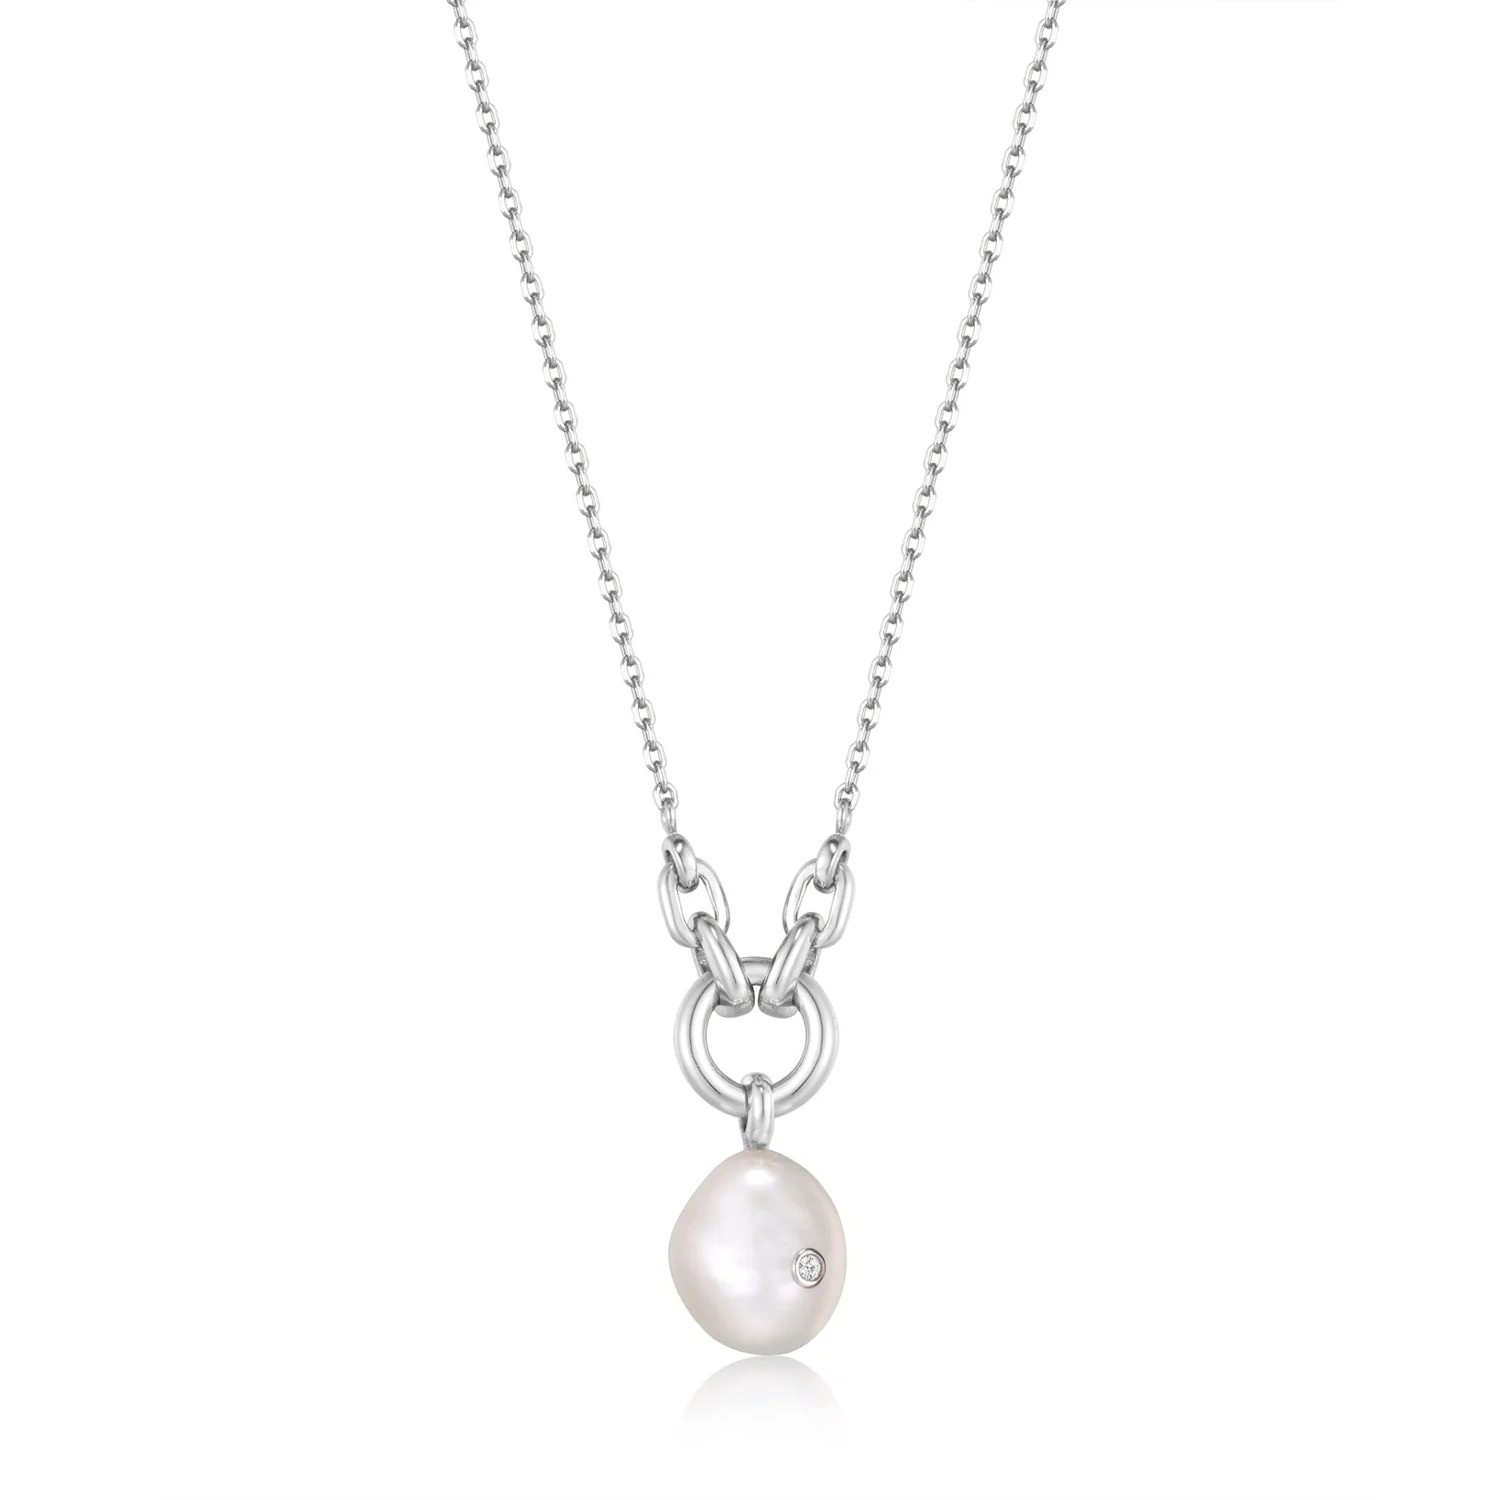 ANIA HAIE Silver Pearl Sparkle Pendant Necklace